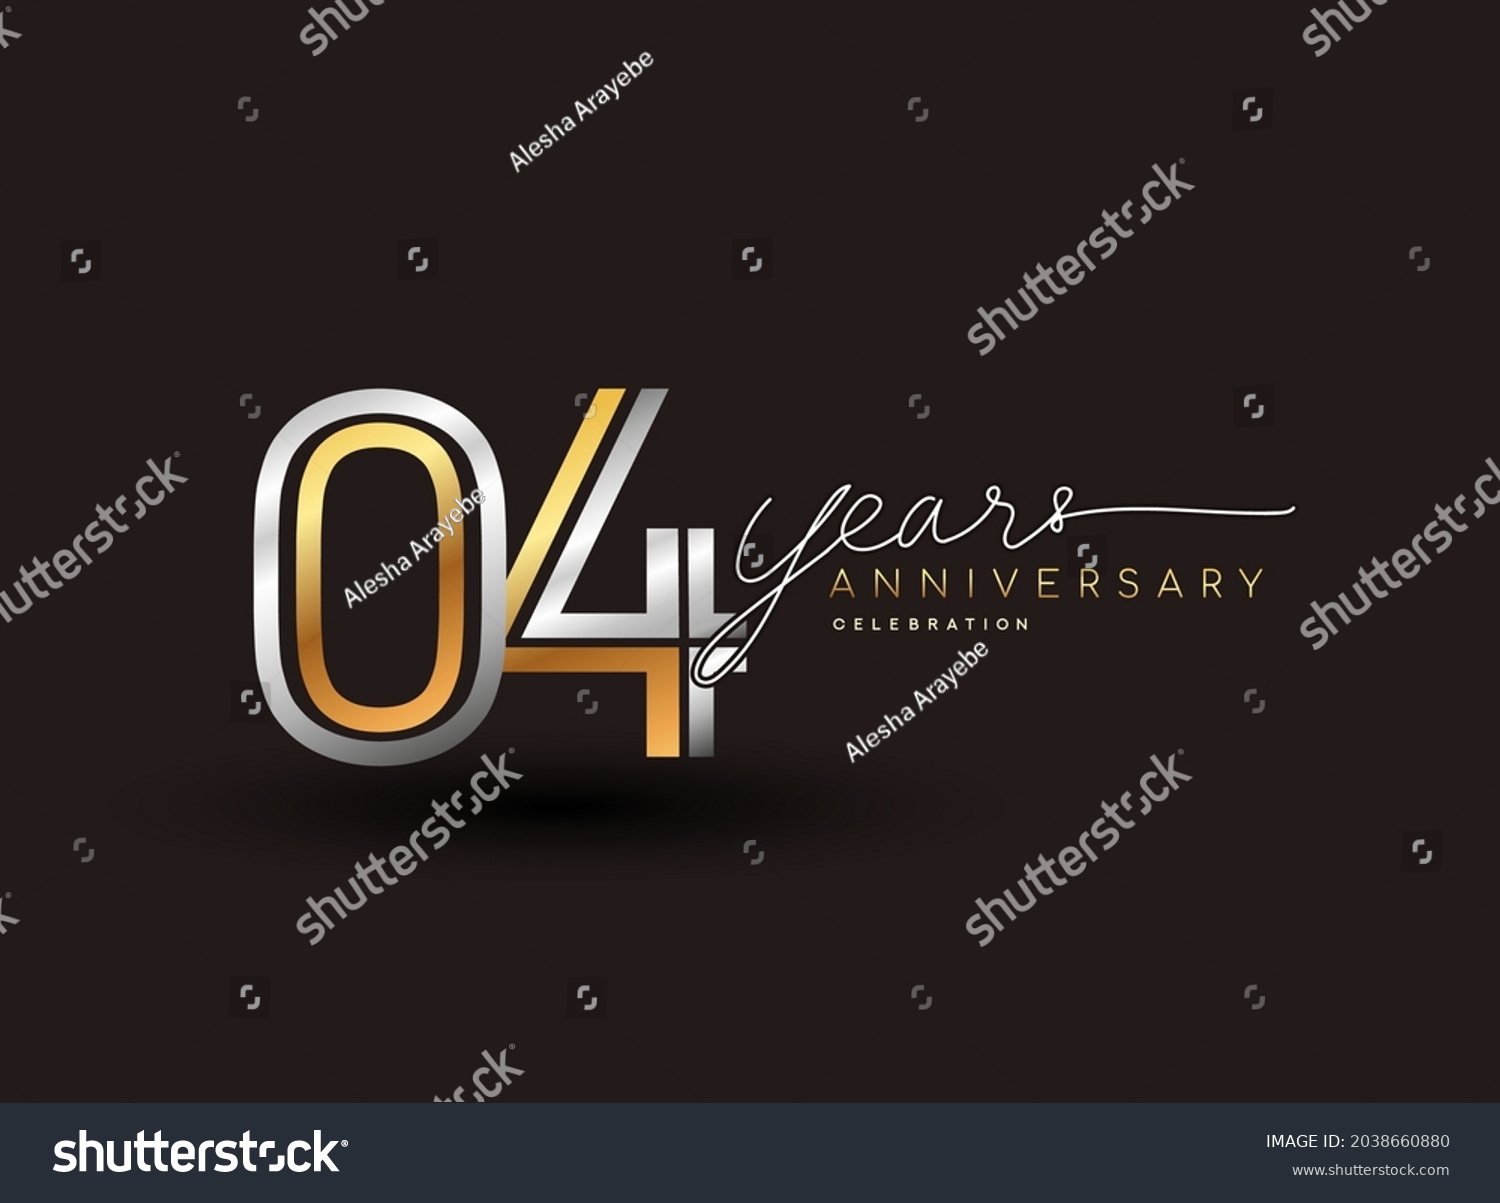 SVG of 4th years anniversary logotype with multiple line silver and golden color isolated on black background for celebration event. svg